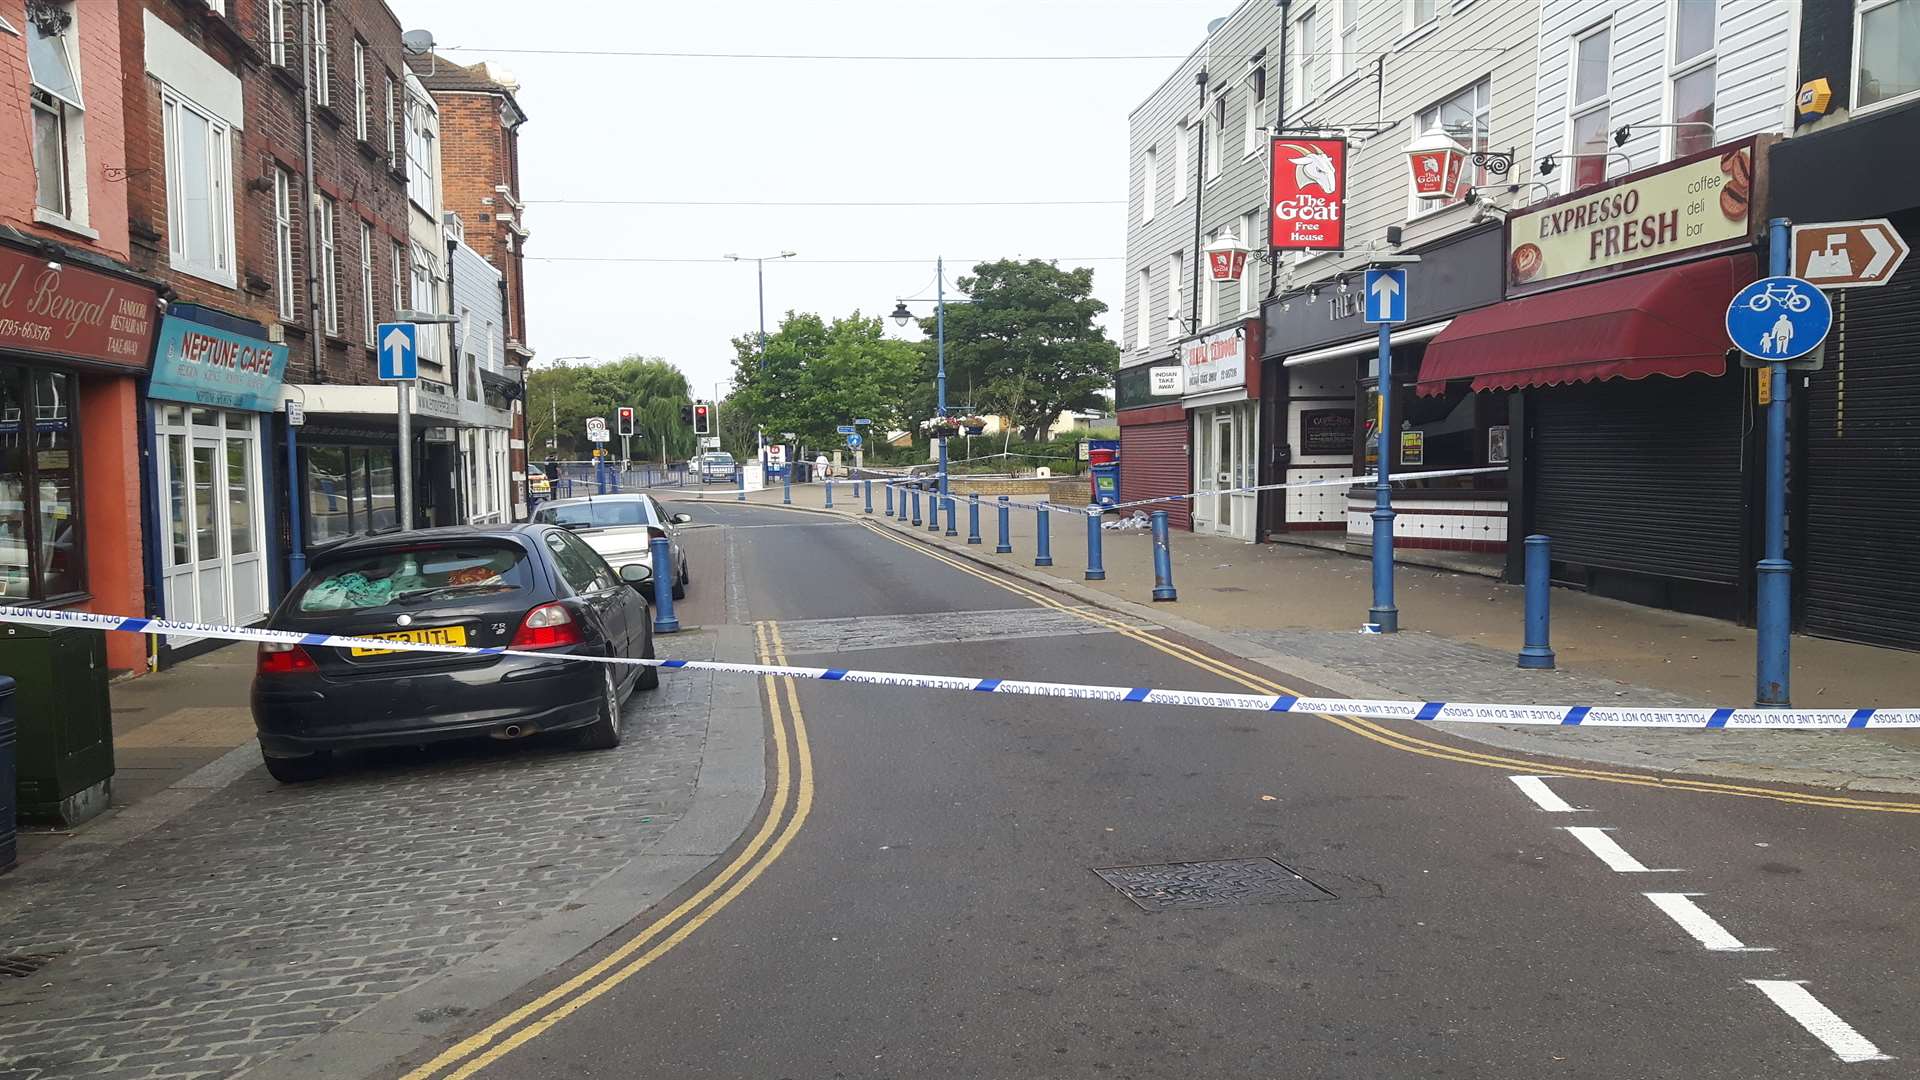 Police have cordoned off parts of Sheerness High Street this morning